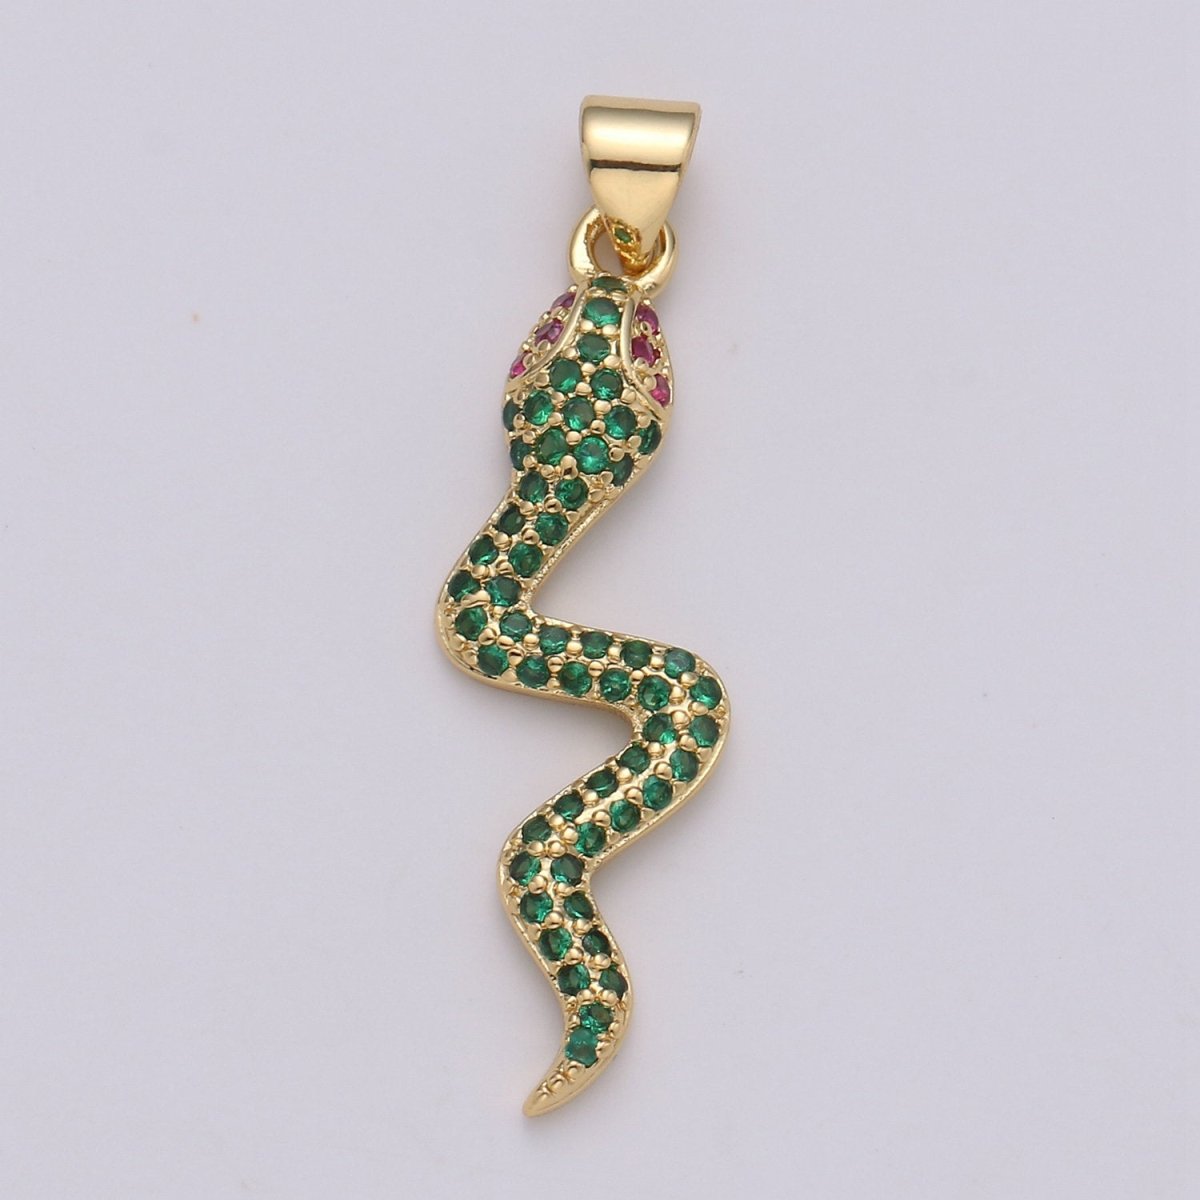 Micro Pave Gold Snake Charm Pendant, Cubic Snake Charms, Dainty Pendant Jewelry in 24K Gold Filled For Statement Necklace Earring I-809~I-811 - DLUXCA